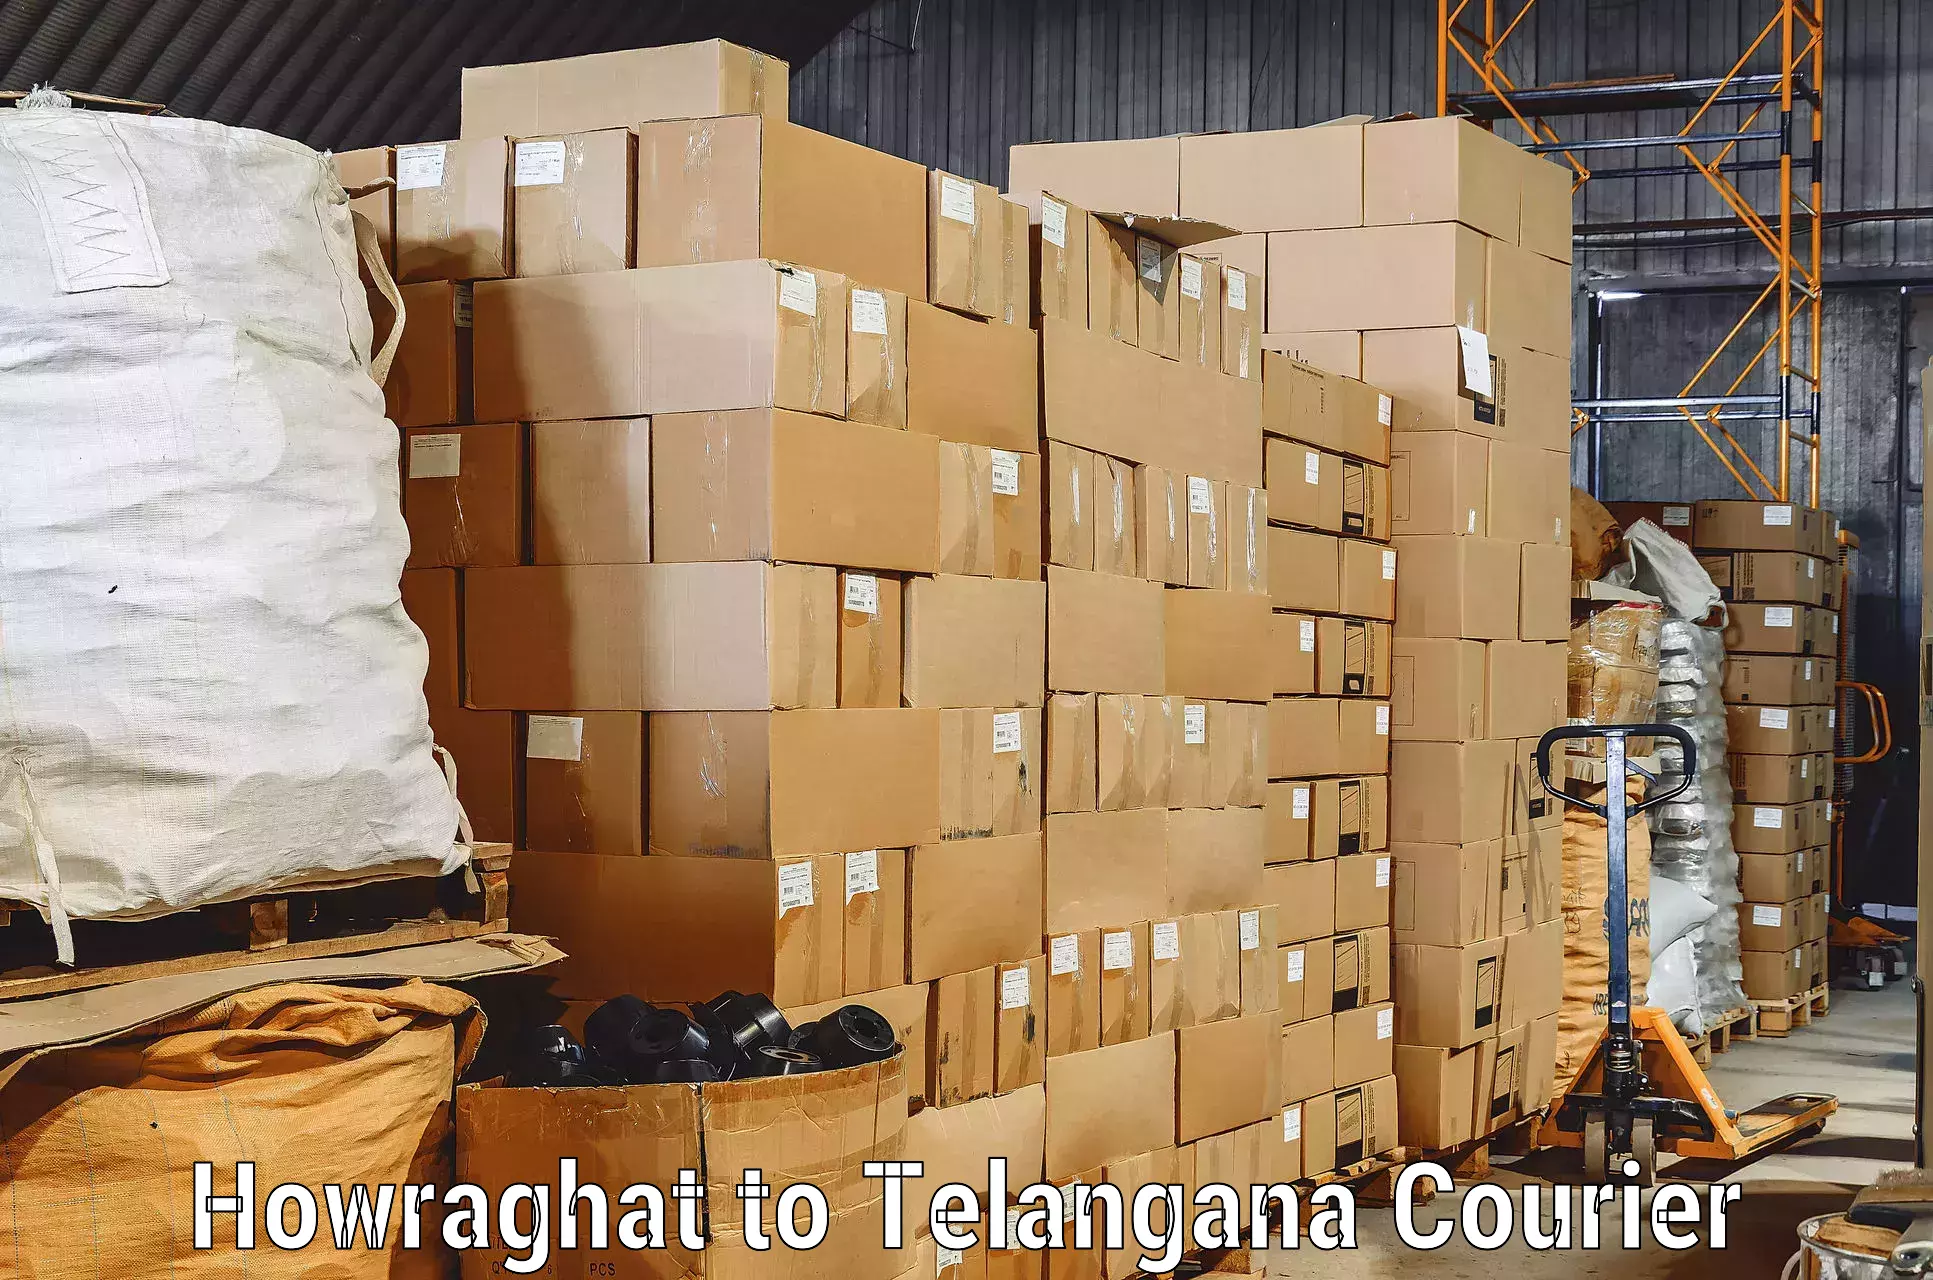 Dependable moving services Howraghat to Shadnagar